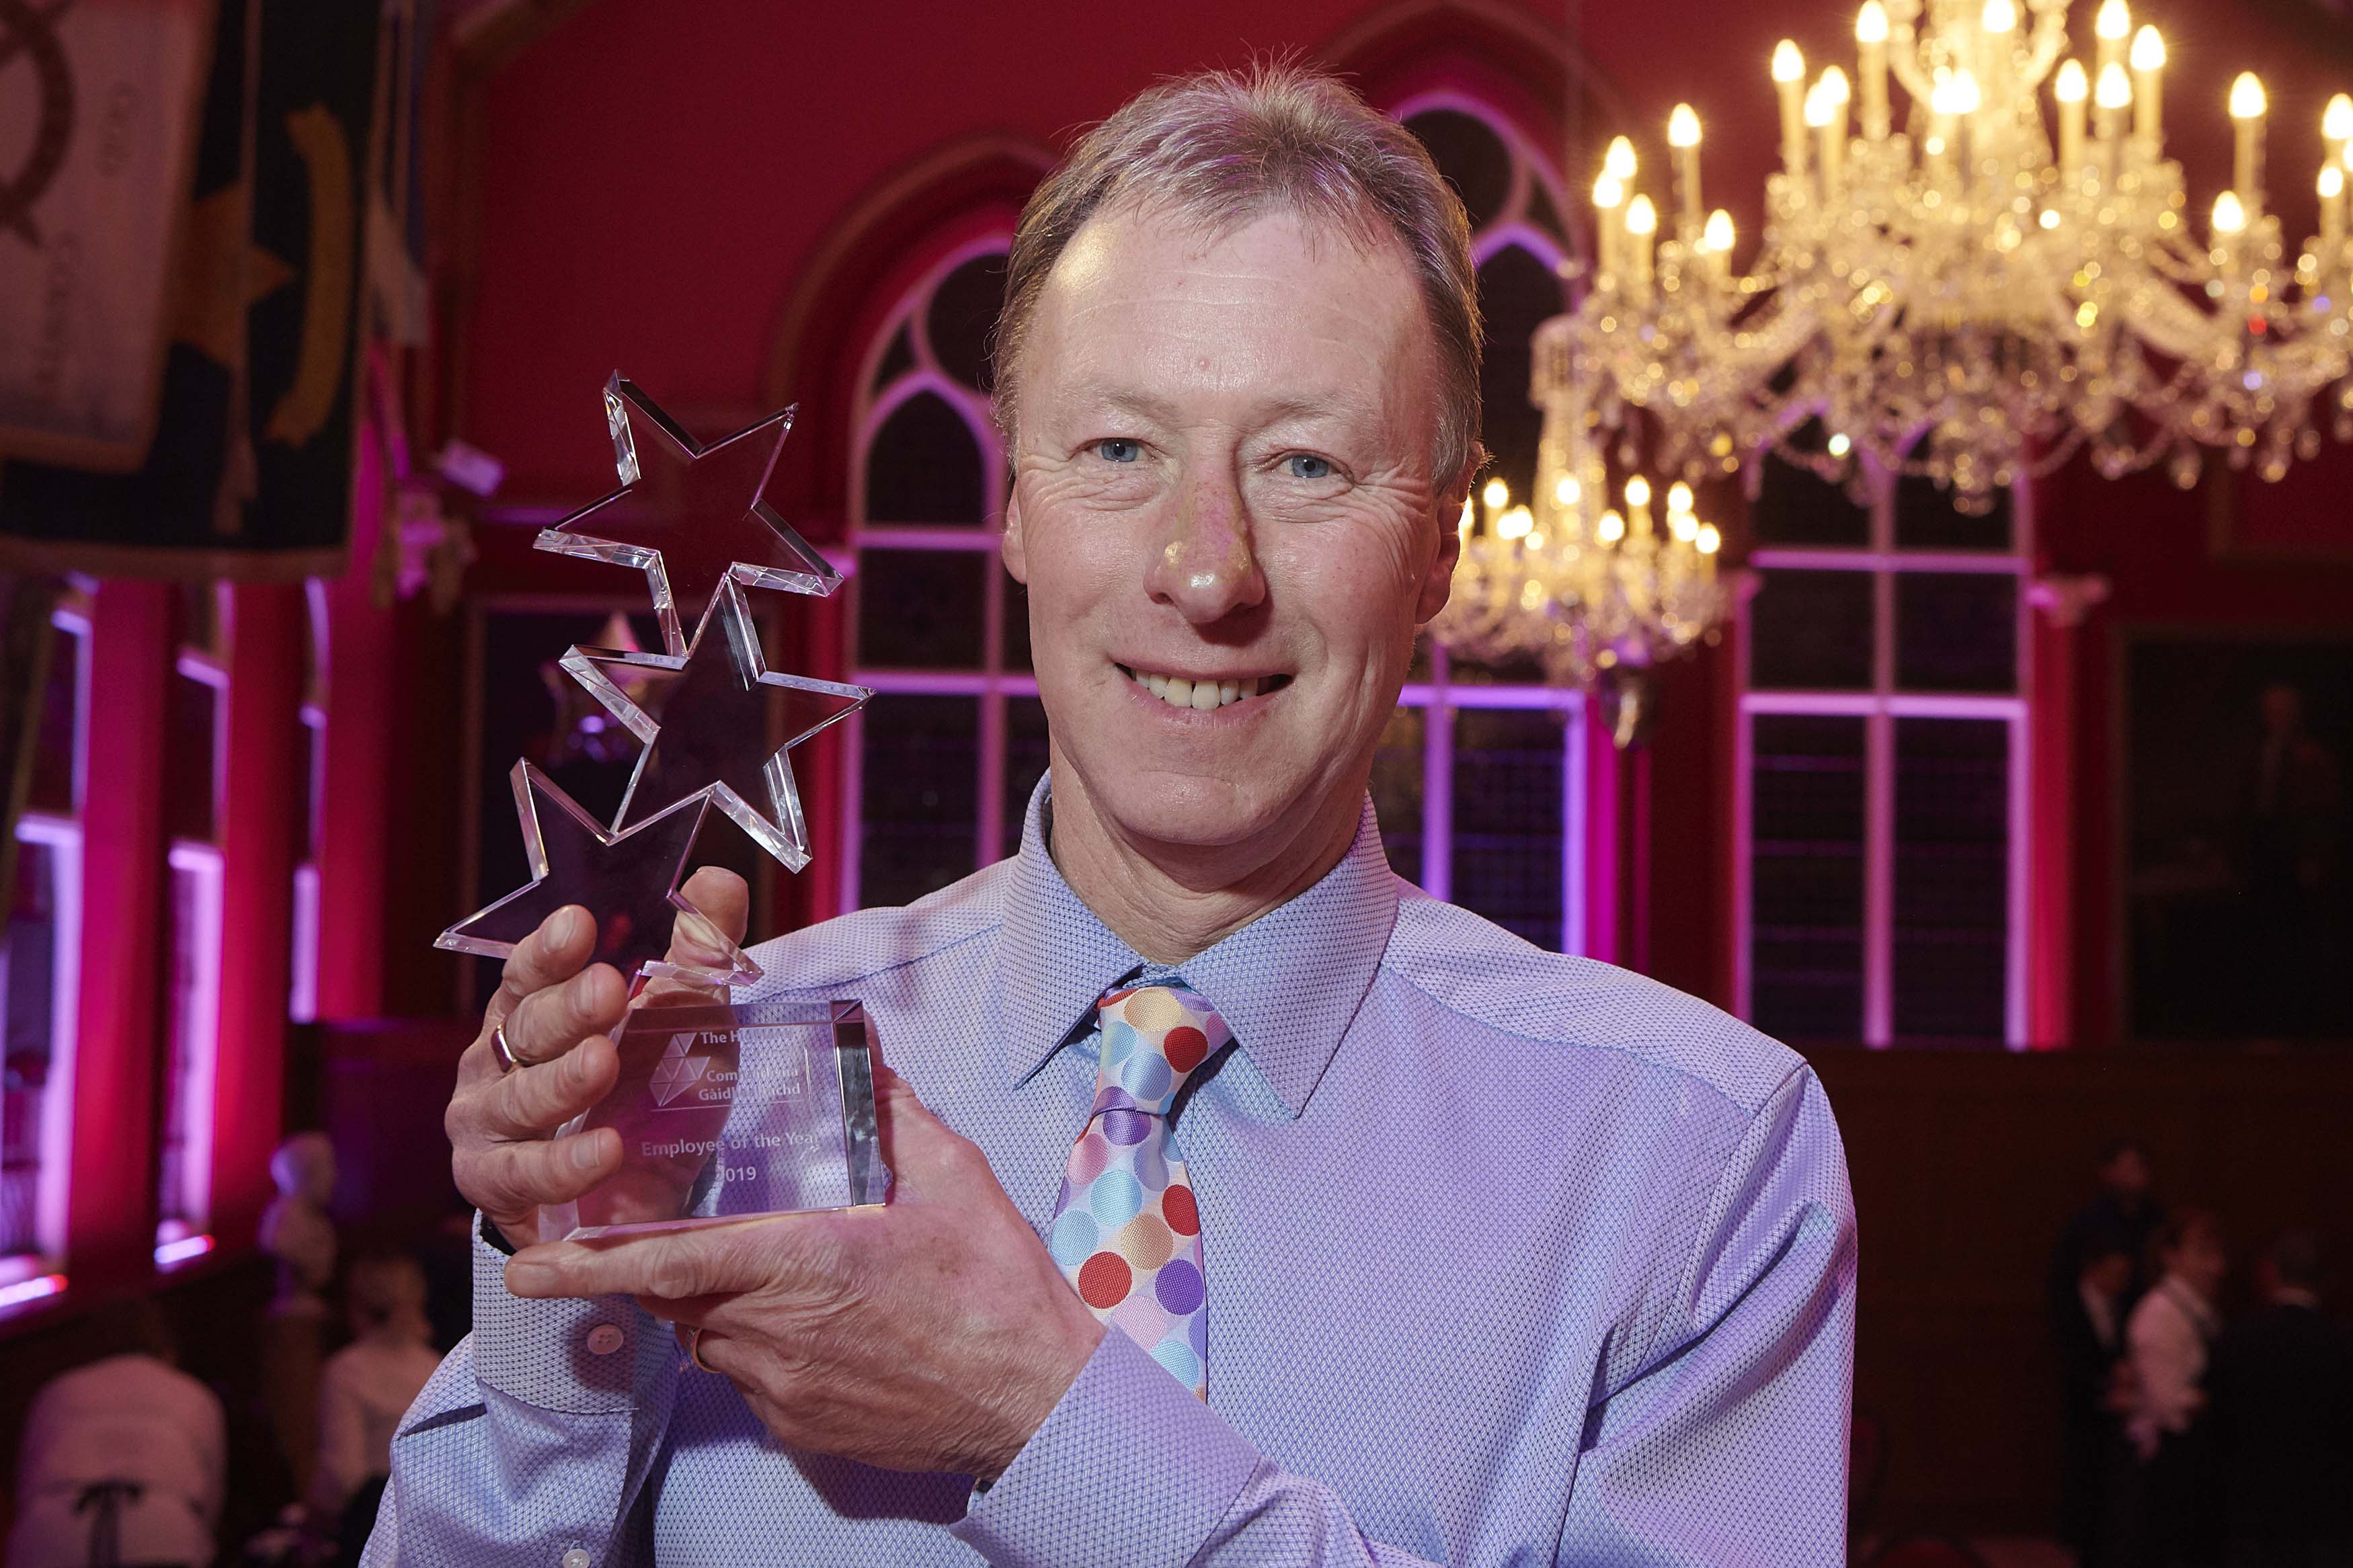 Ron Archer was recognised as the Highland Council's Employee of the Year at their annual Quality Awards.